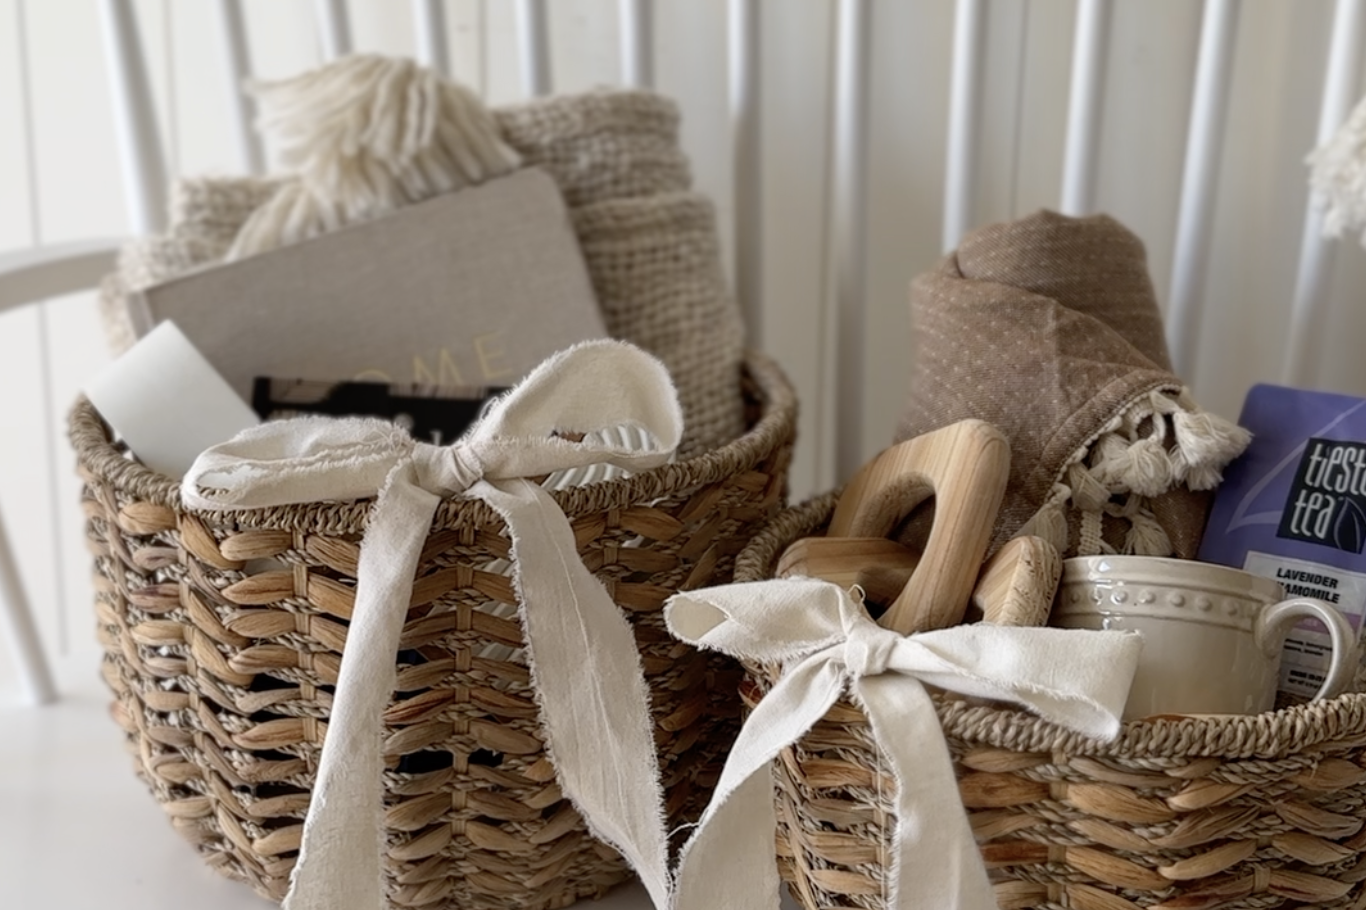 Mother's Day: Gift Baskets for Her